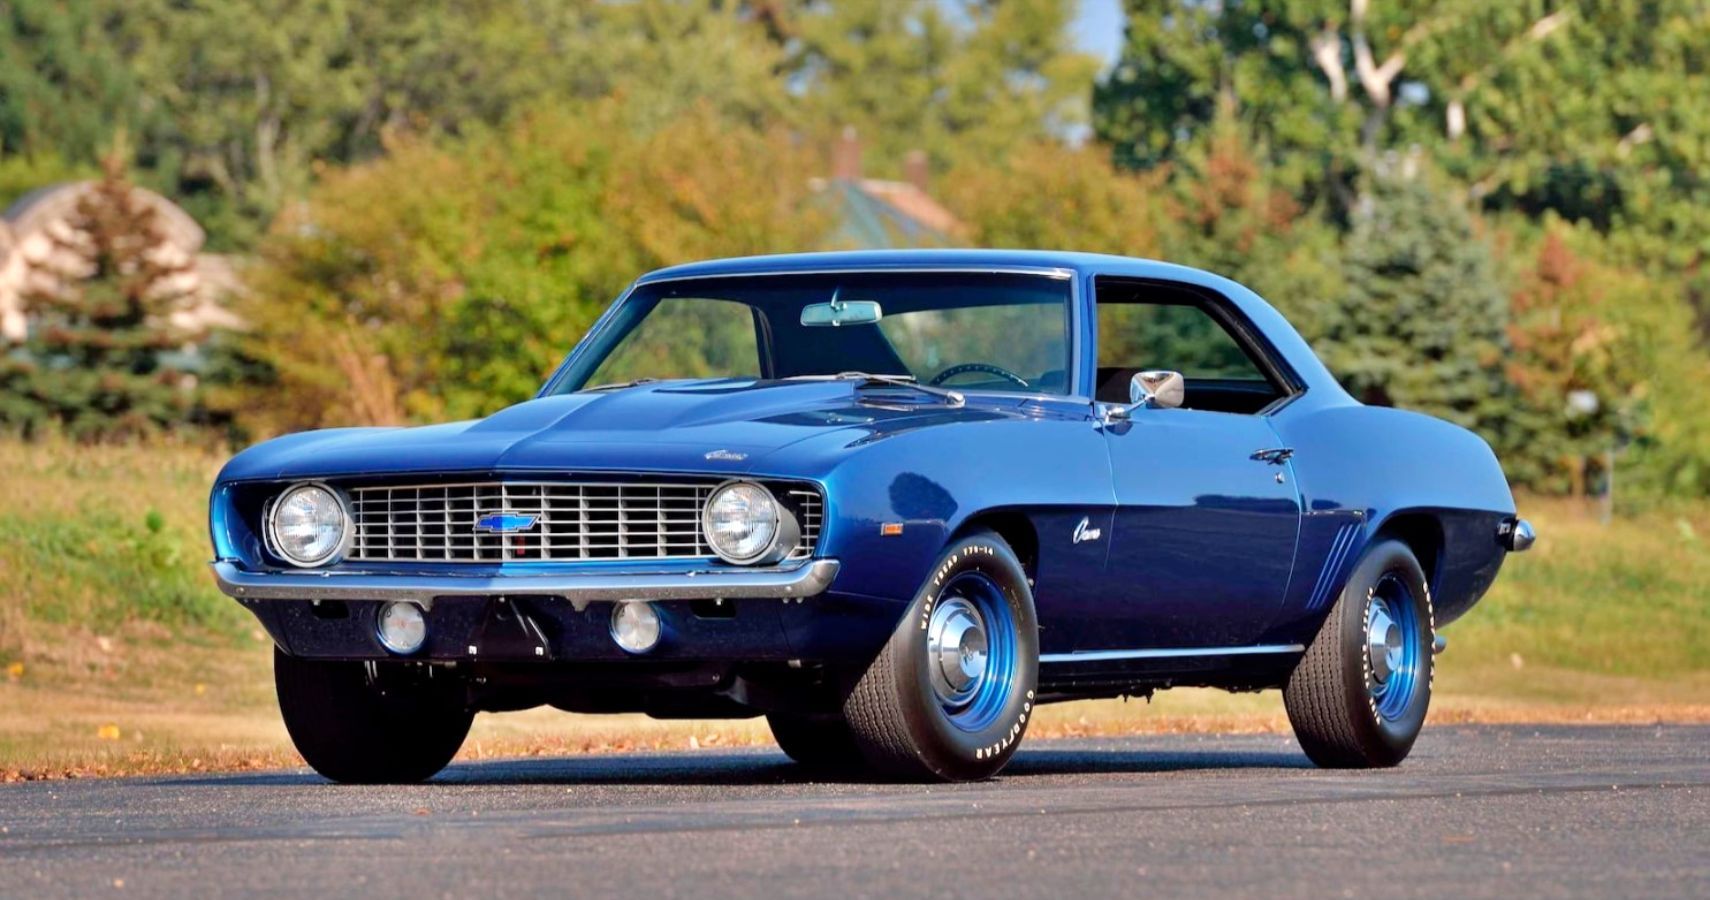 10 Best Used Muscle Cars For Drag Racing